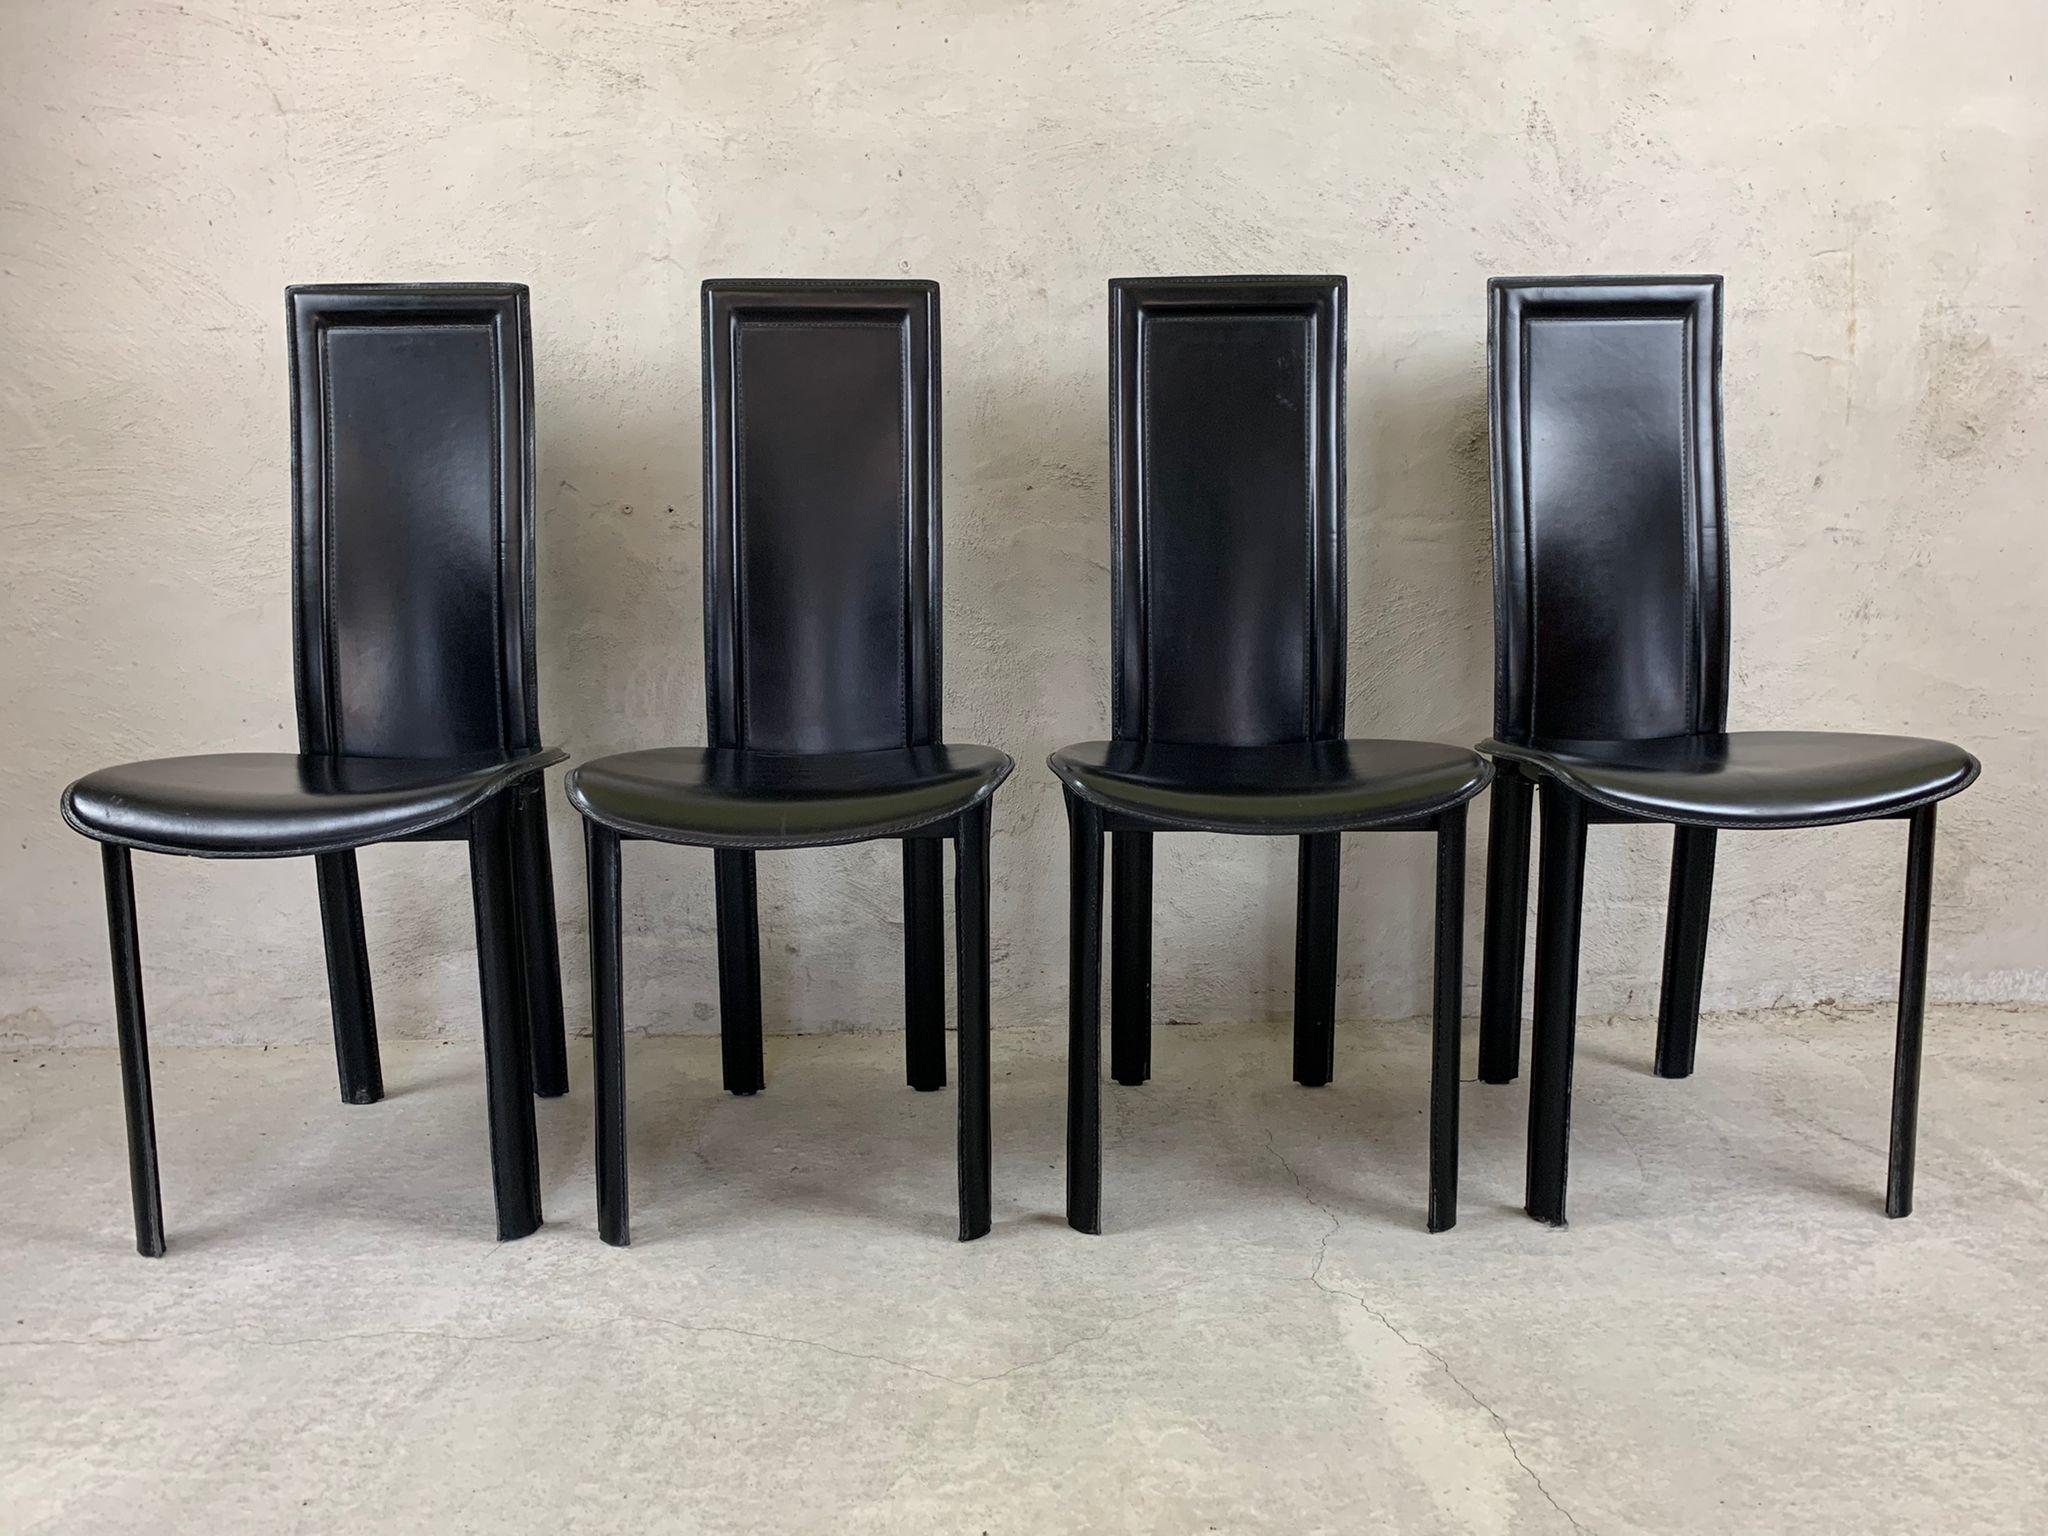 Set of 8 black italian leather high back dining chairs.

beautiful sleek and timeless design.

The chairs are in good condition with minimal wear.

1980s - Italy
